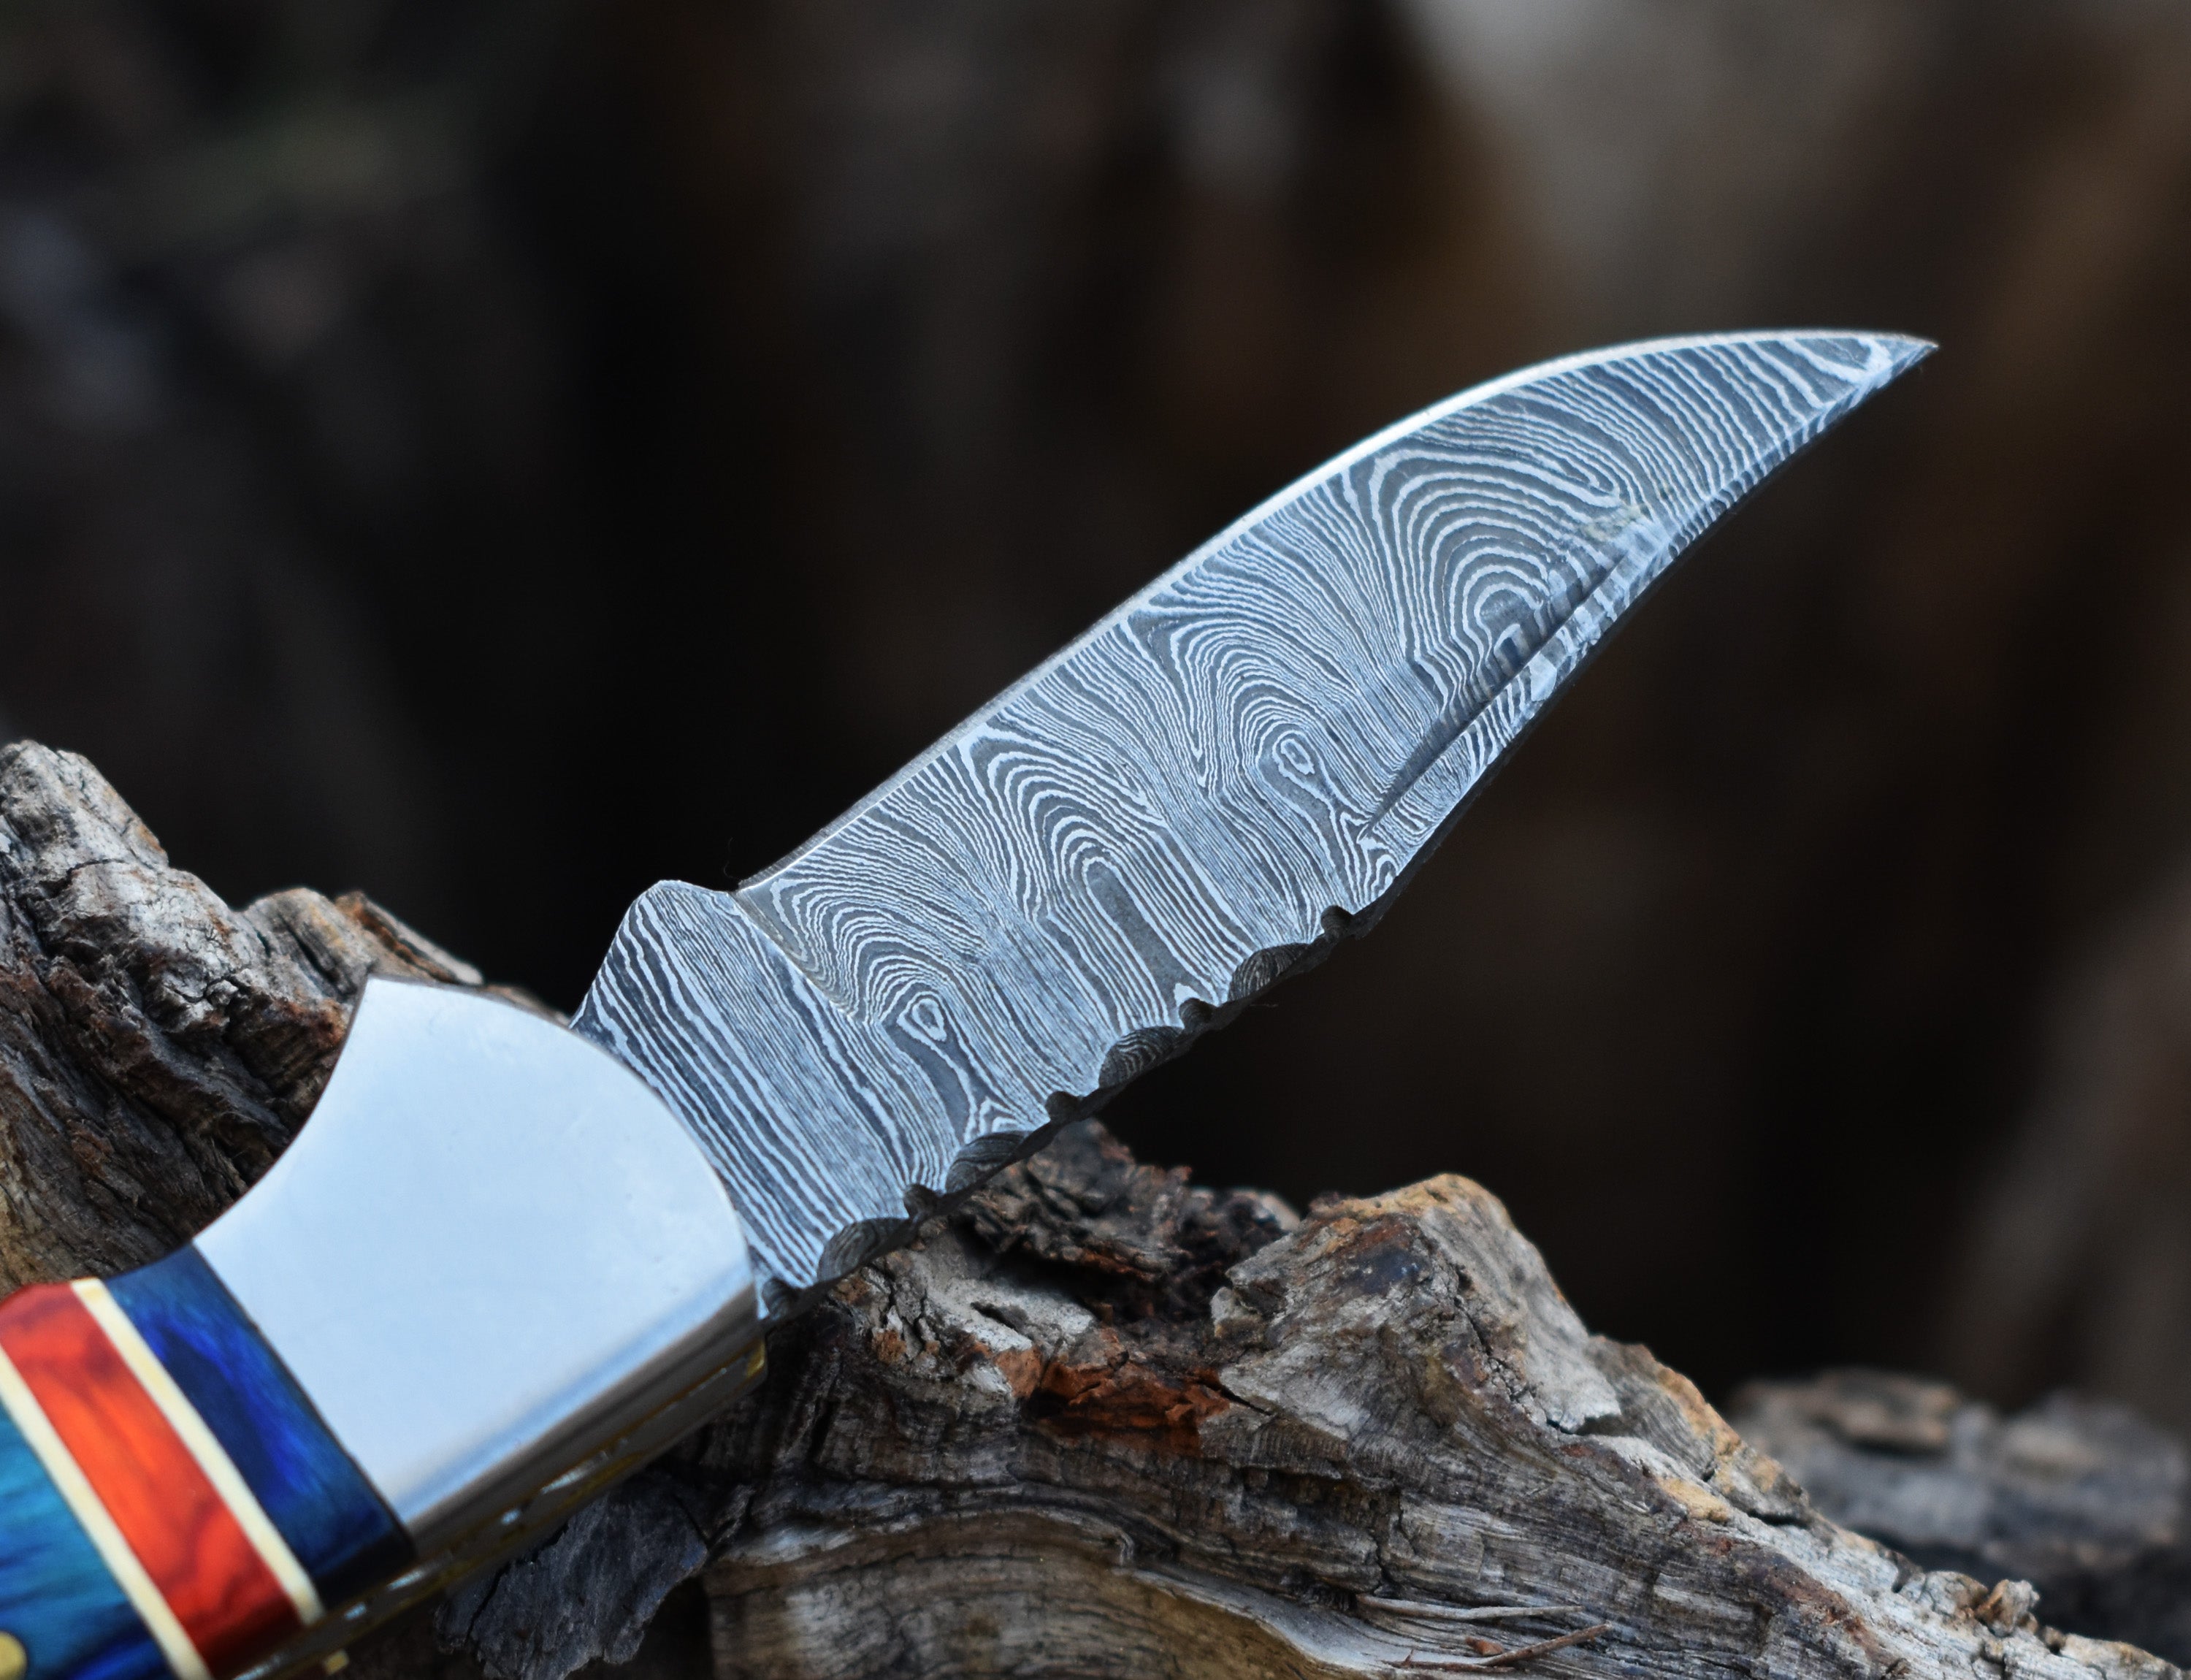 6.5" Handmade Damascus Steel Folding Knife Blue & Grey Handle Back Lock Pocket Knife With Leather Pouch Personalized Gift for Men.